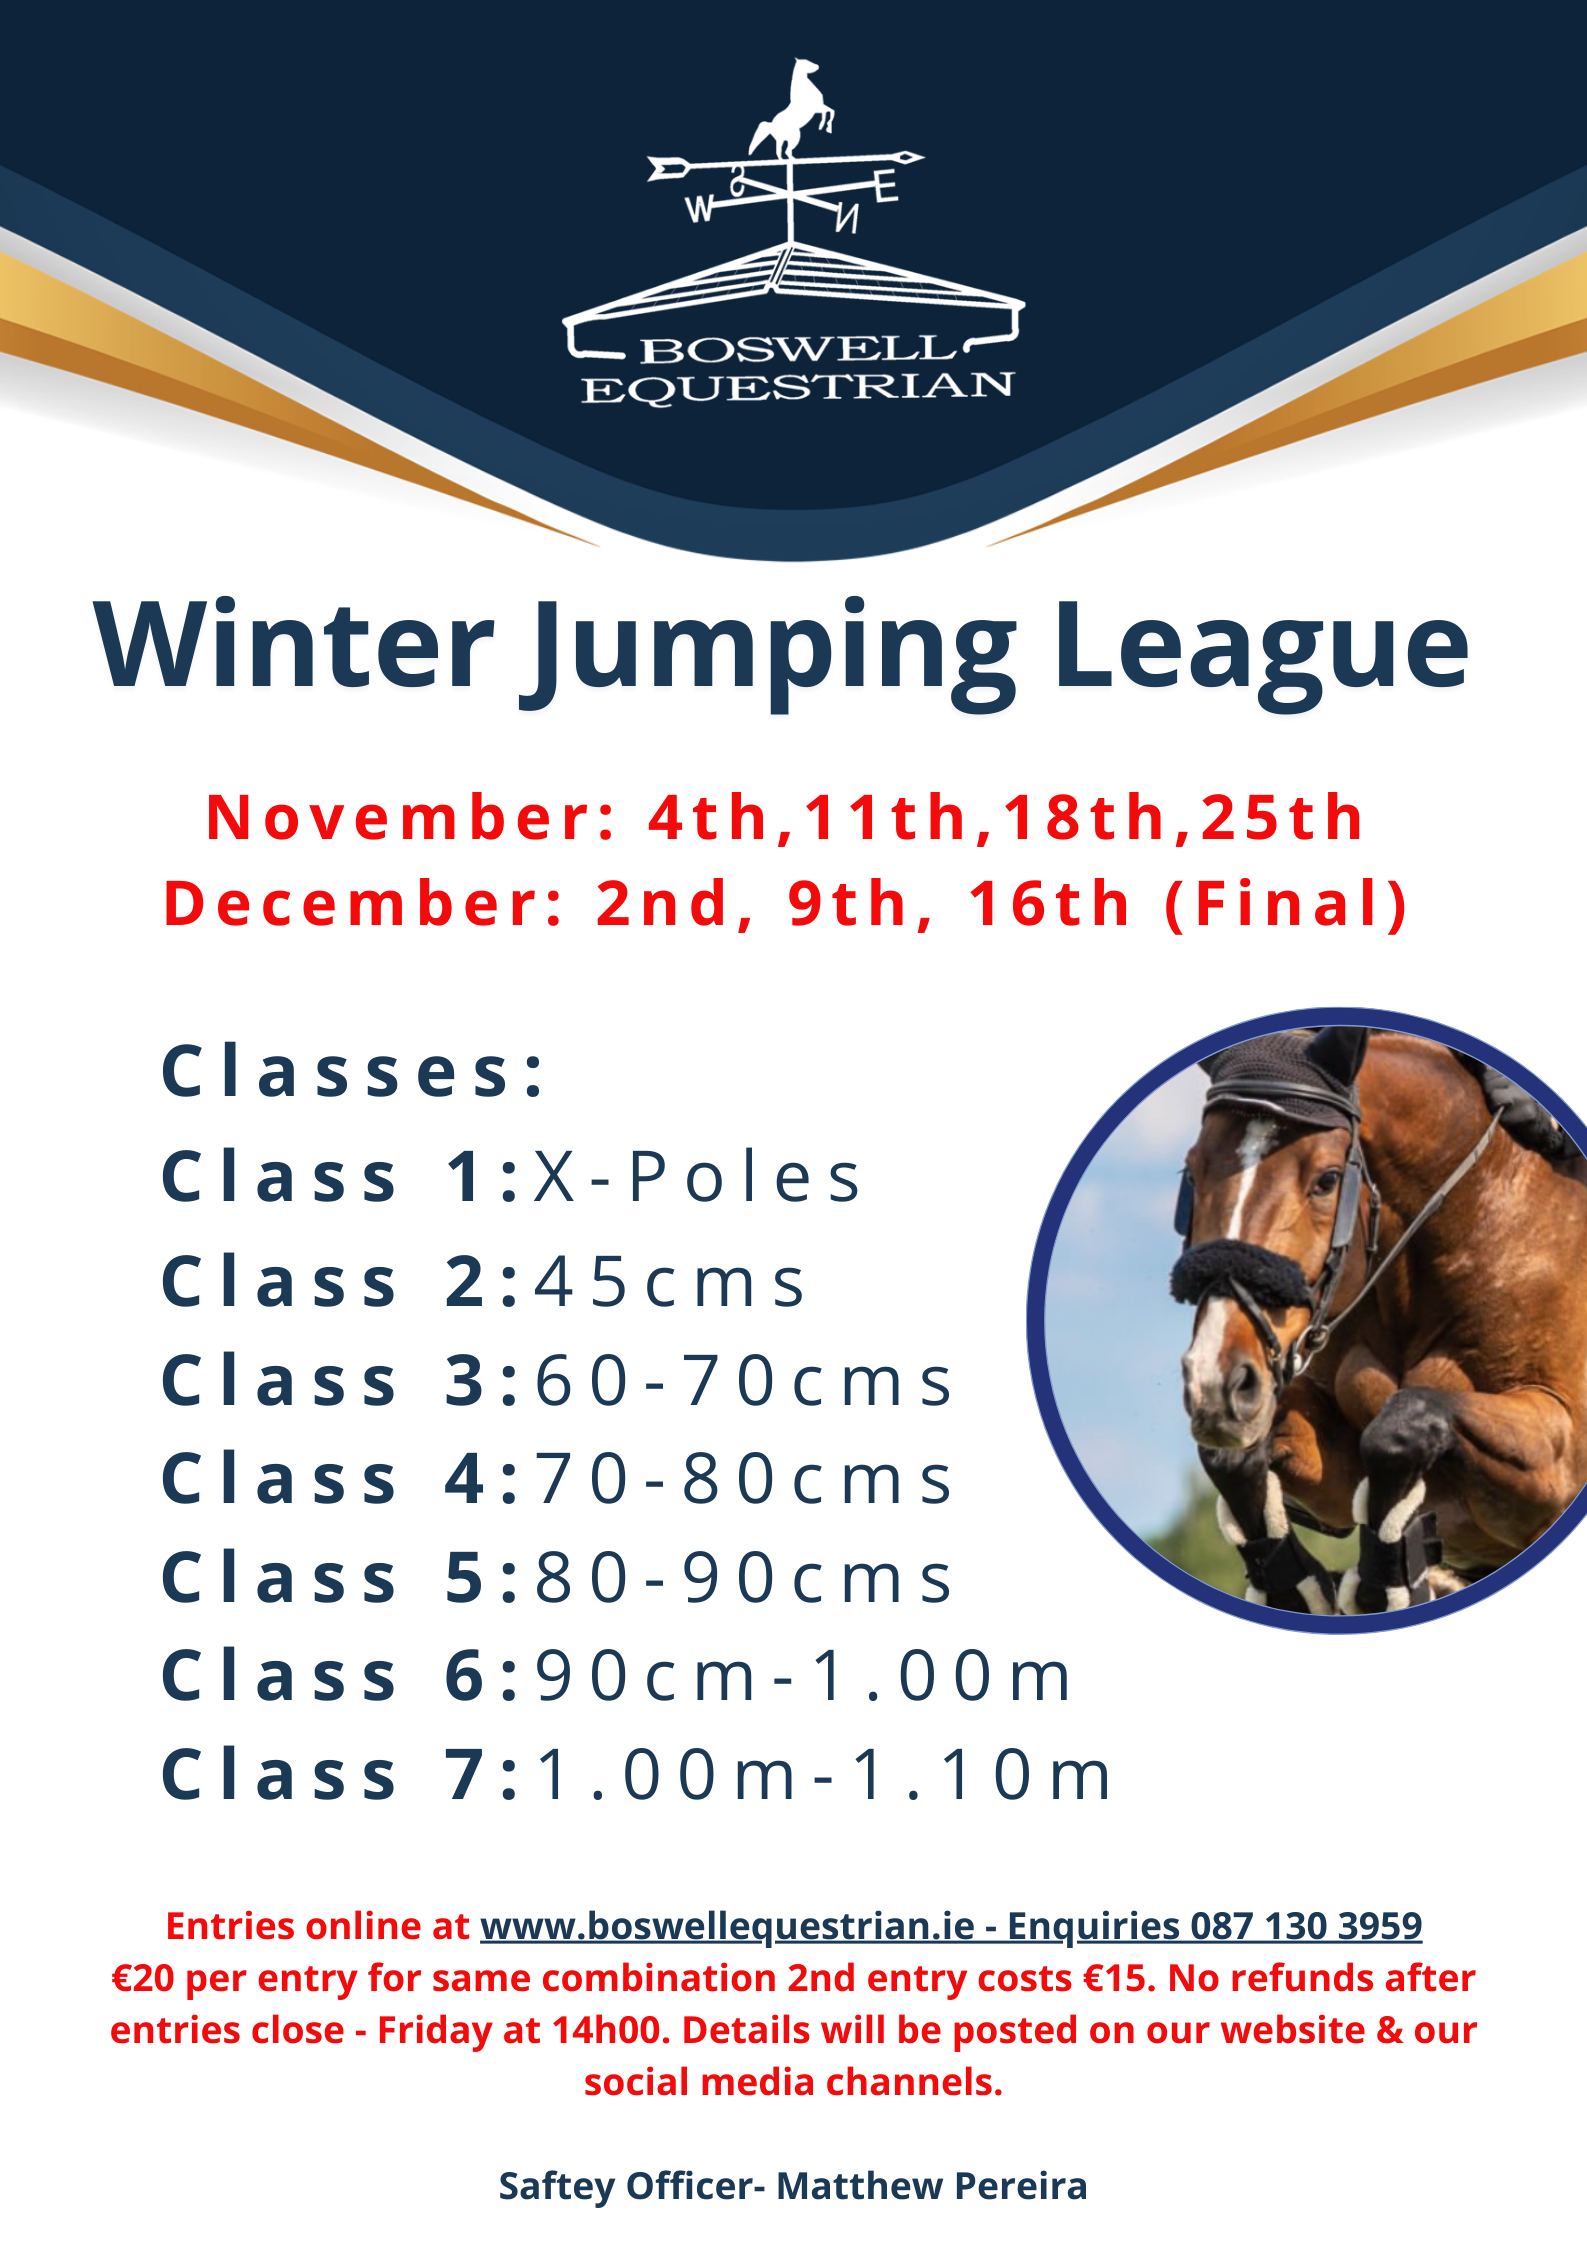 Winter Jumping League at Boswell Equestrian